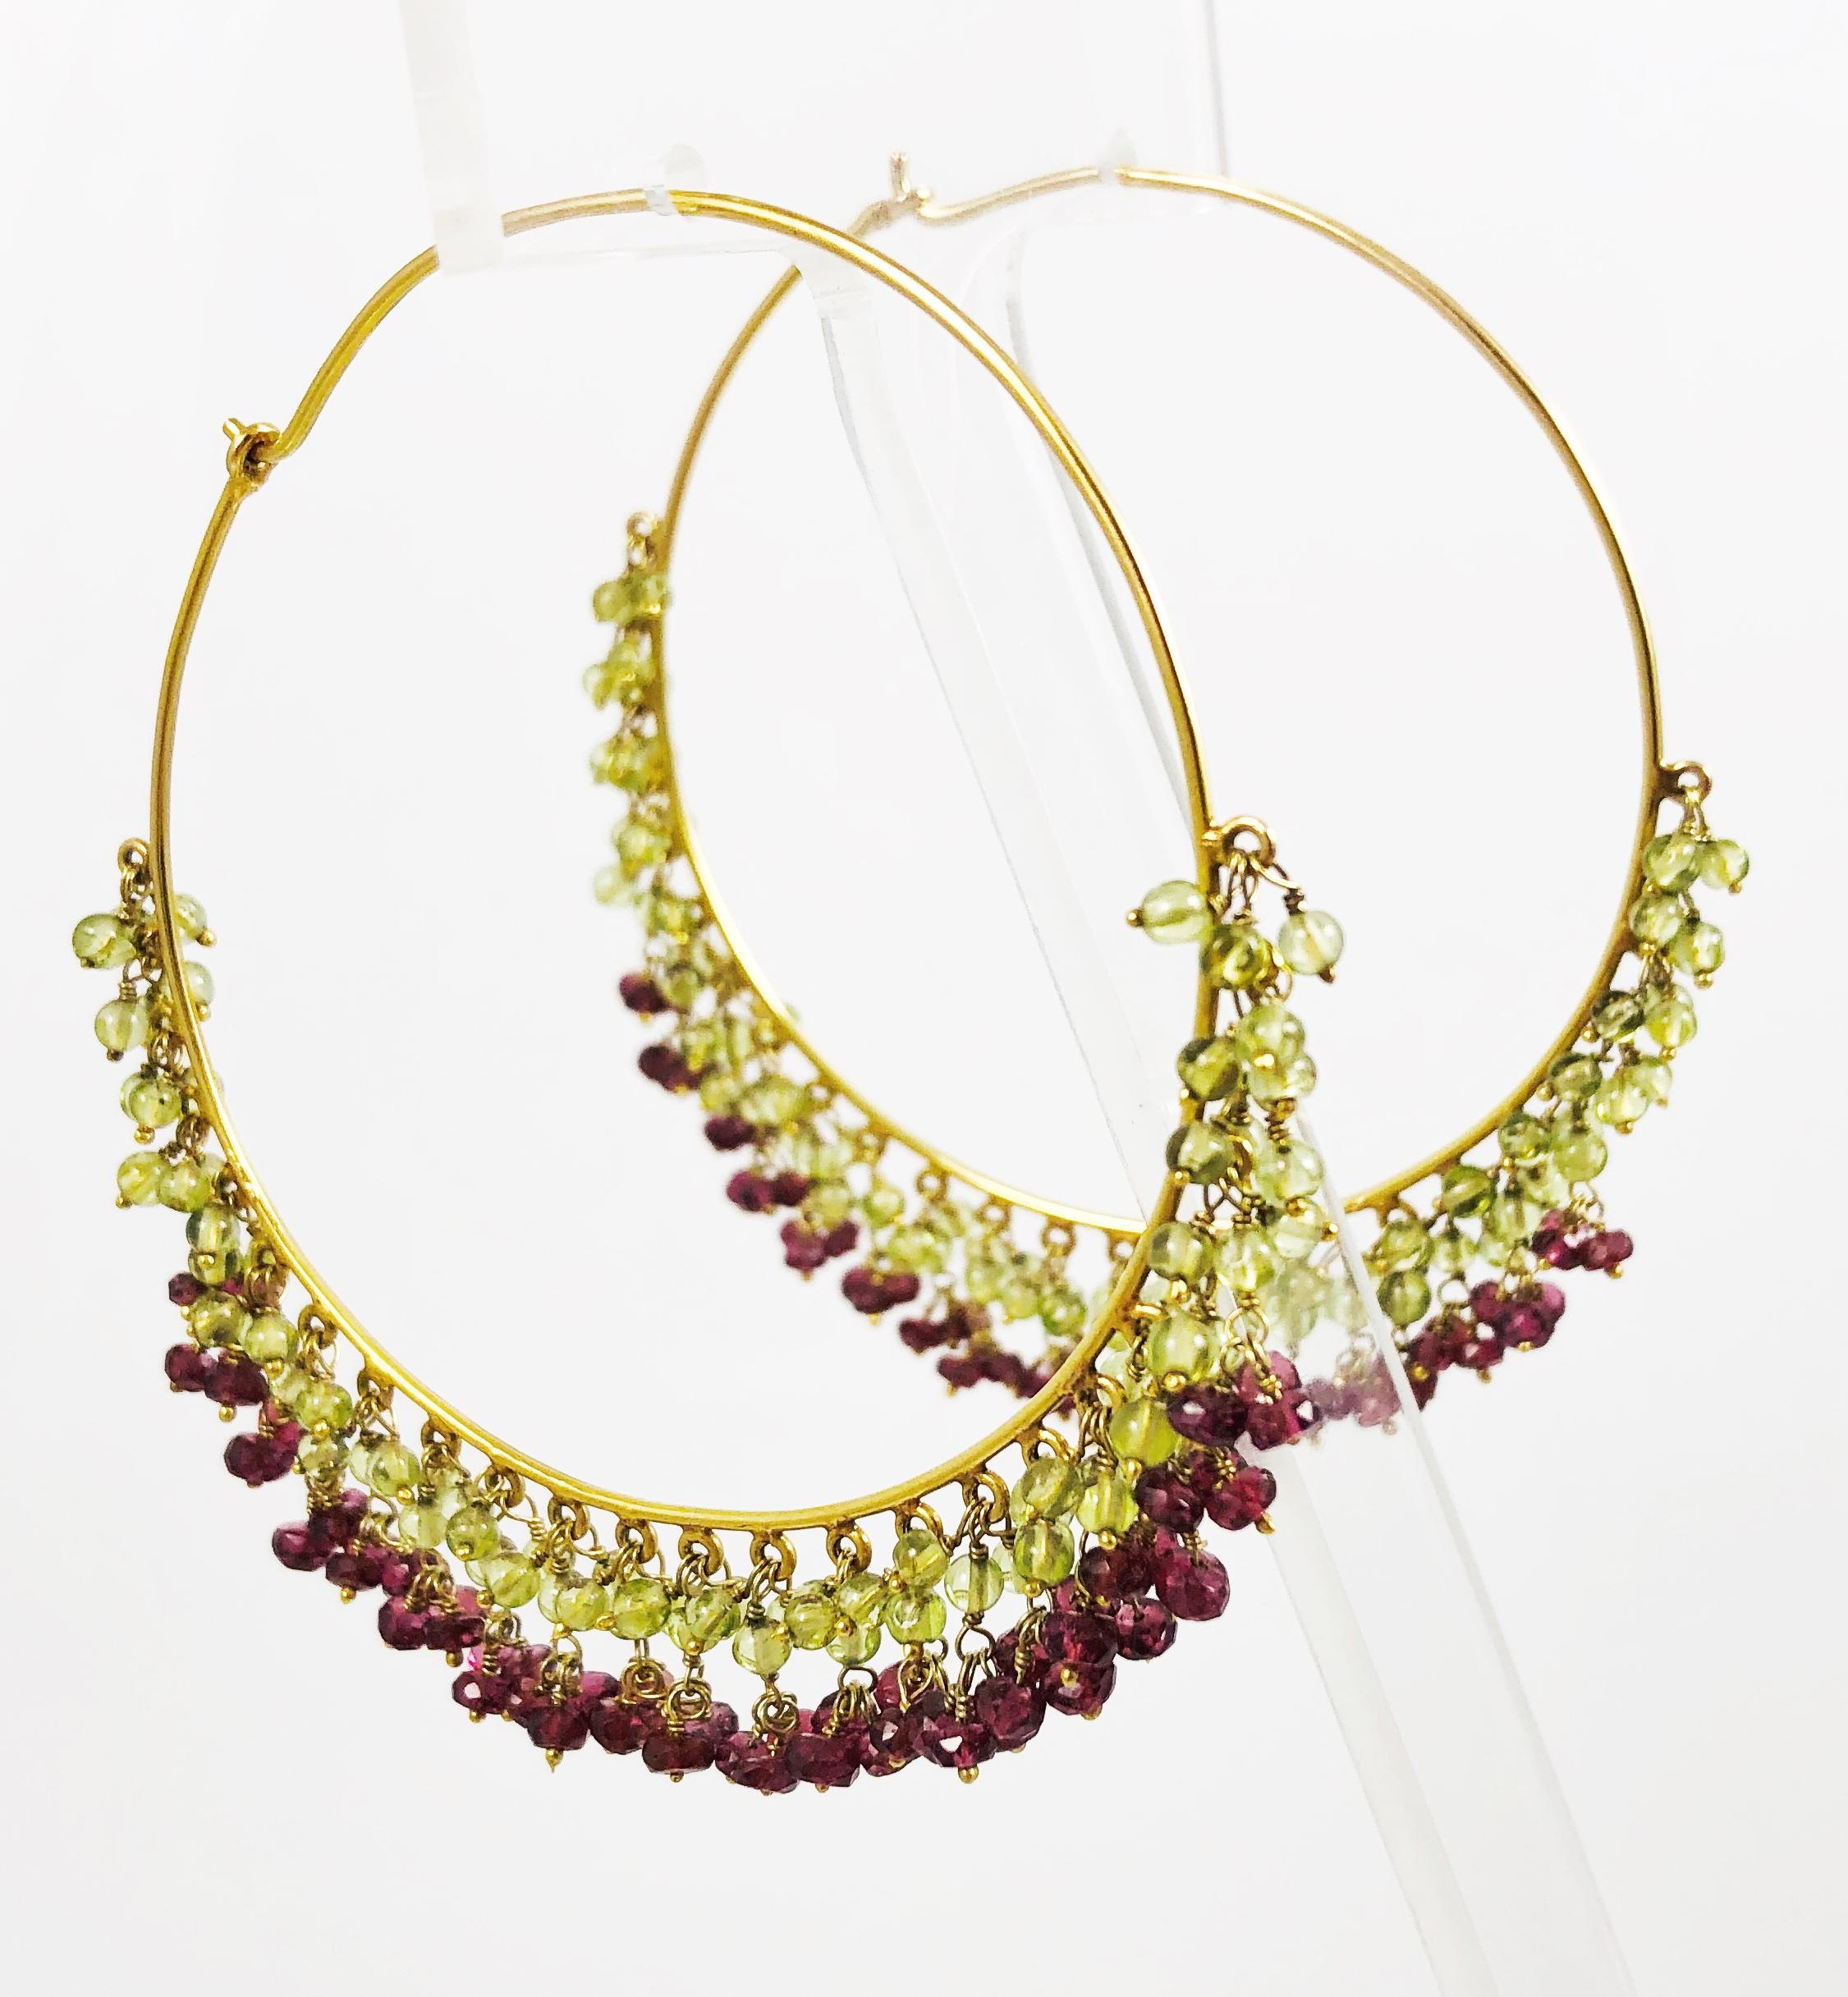 Contemporary Amrita Singh Large Gold Hoop Earrings with Peridot and Garnet